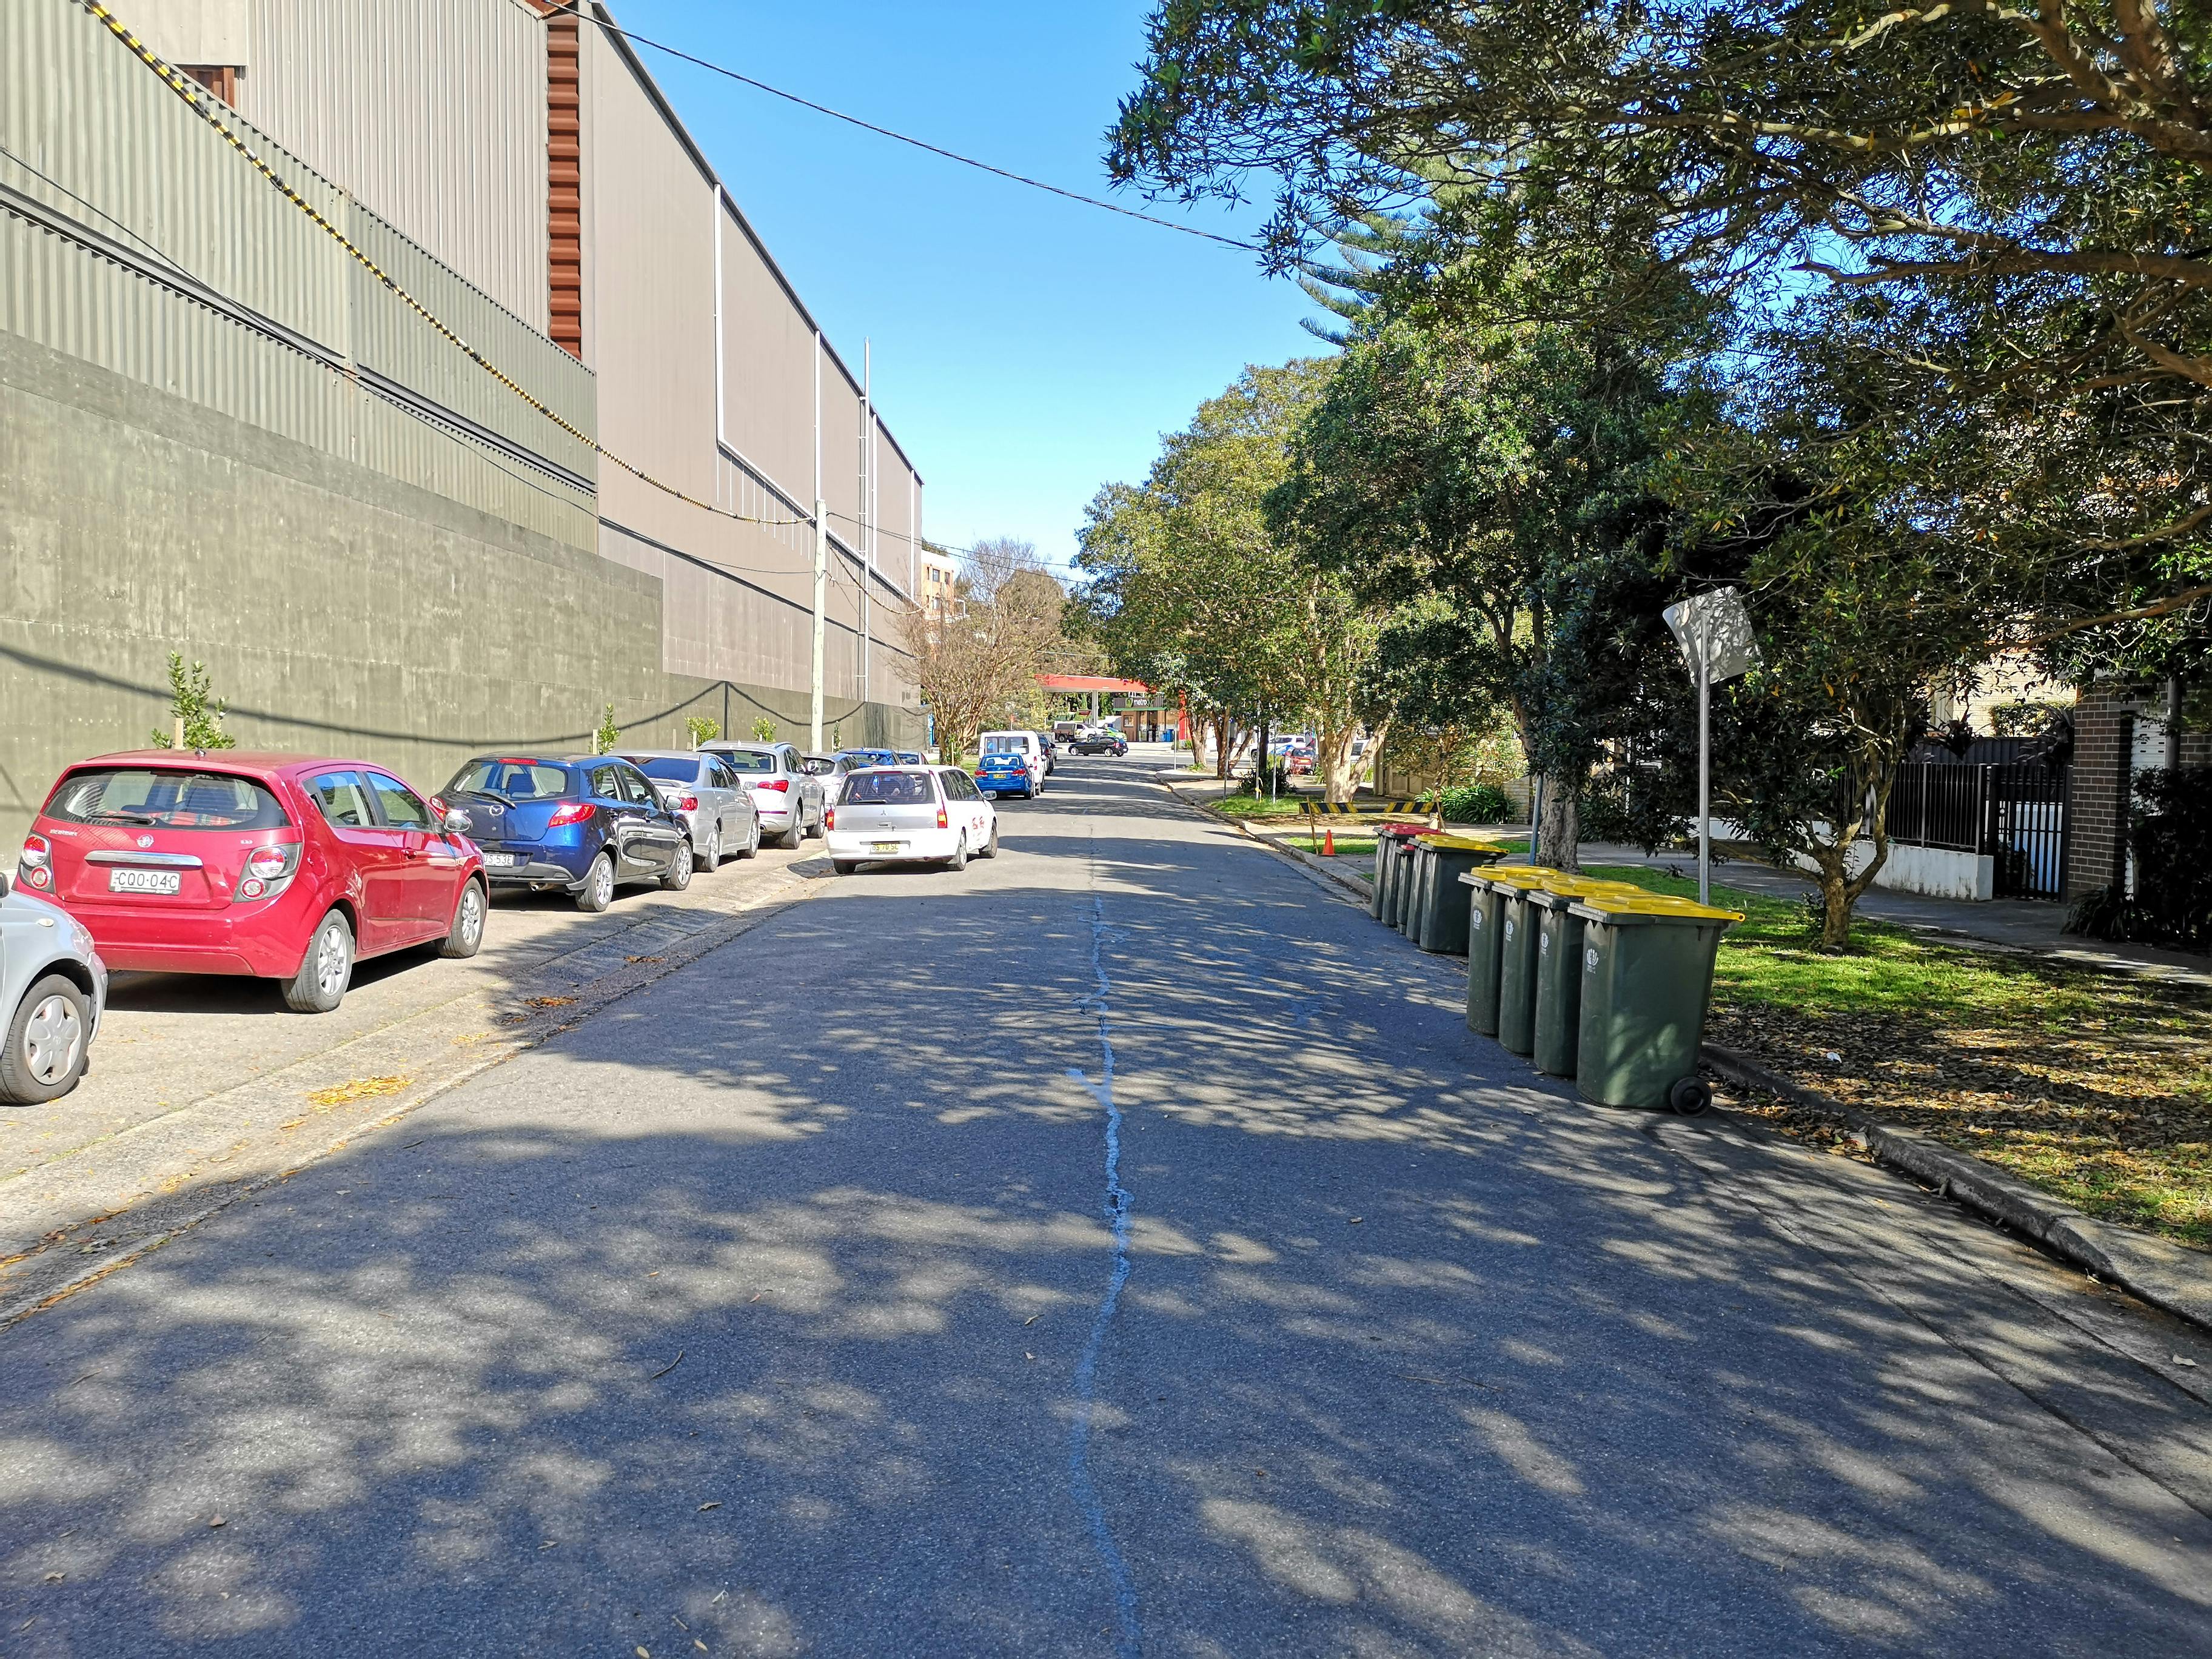 Nelson St, Chatswood, where an on-road bicycle treatment is proposed to be placed